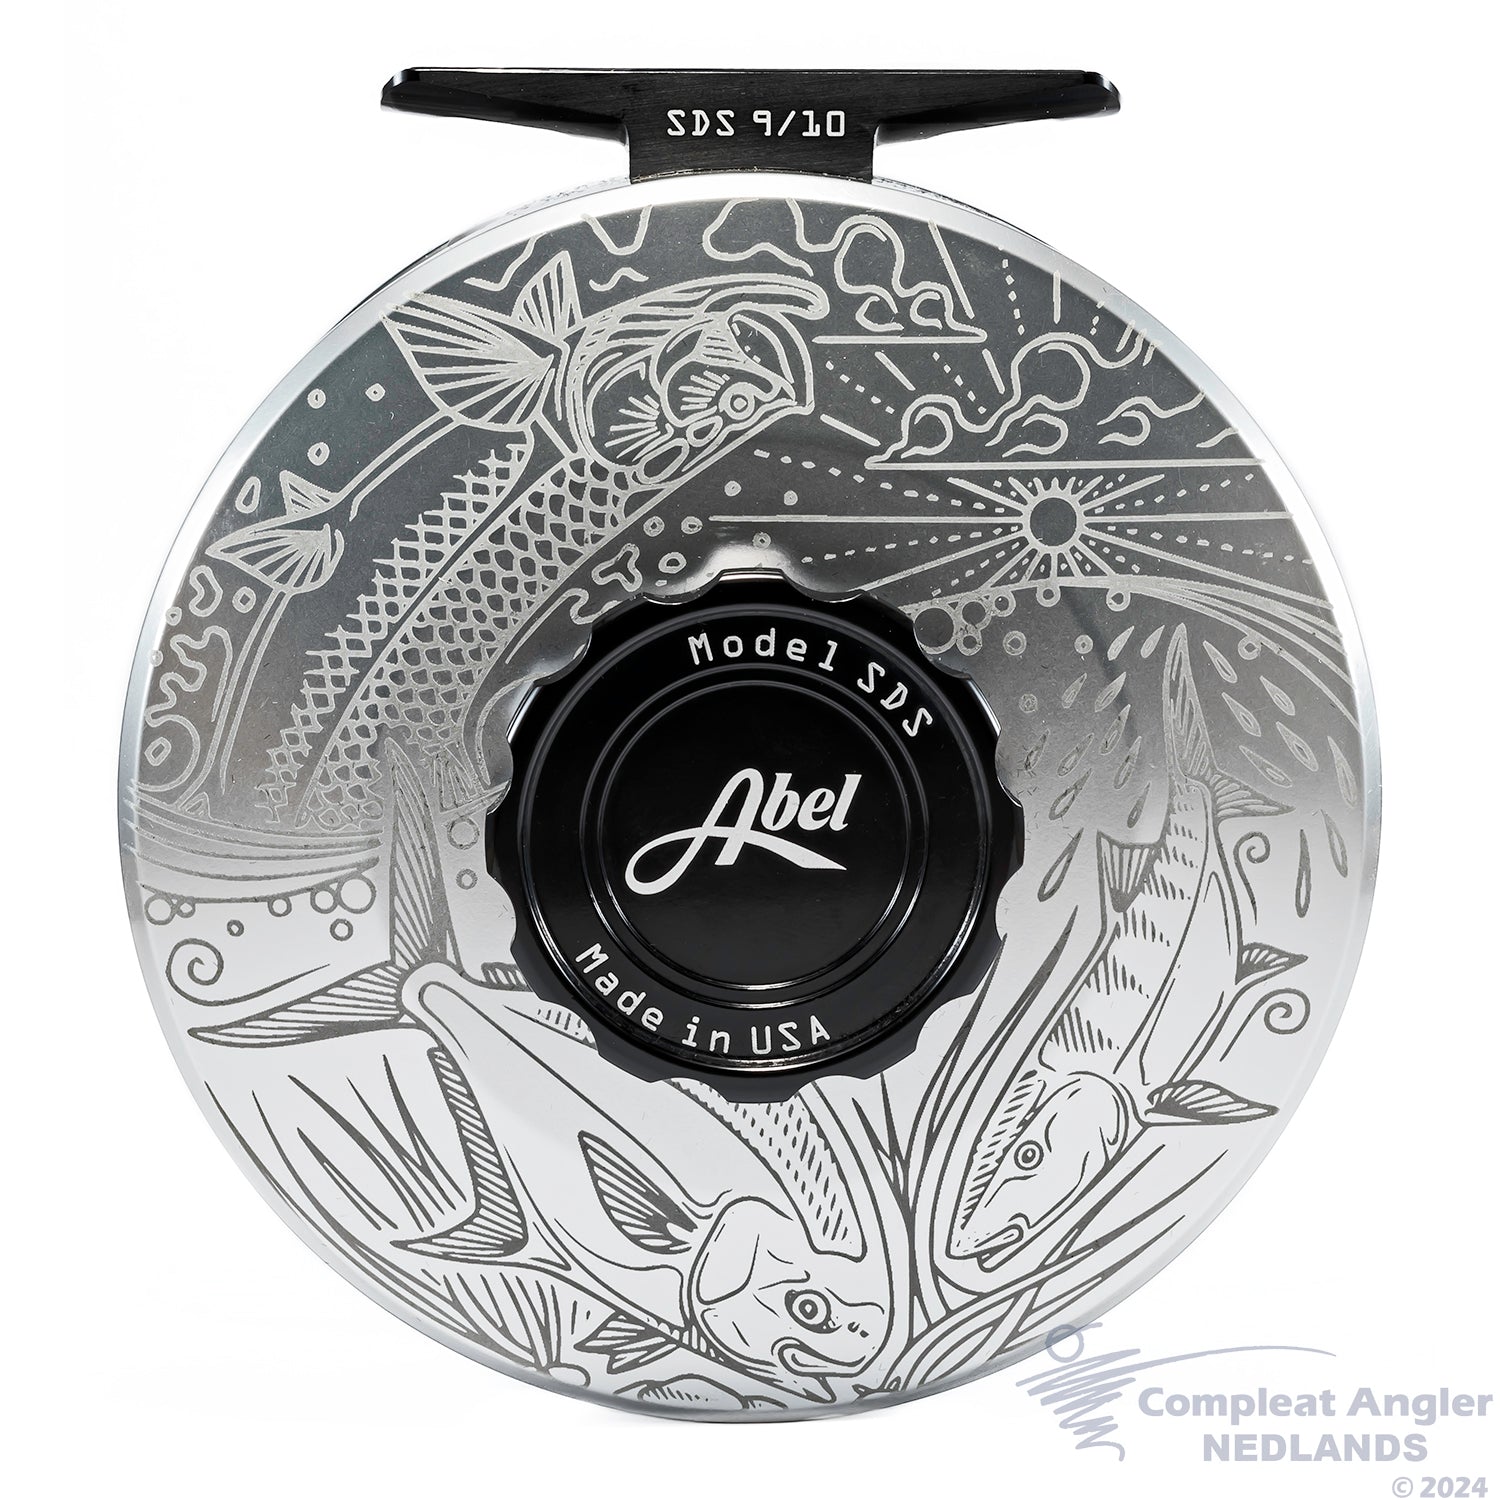 Rio Saltwater Tapered Leader - The Compleat Angler